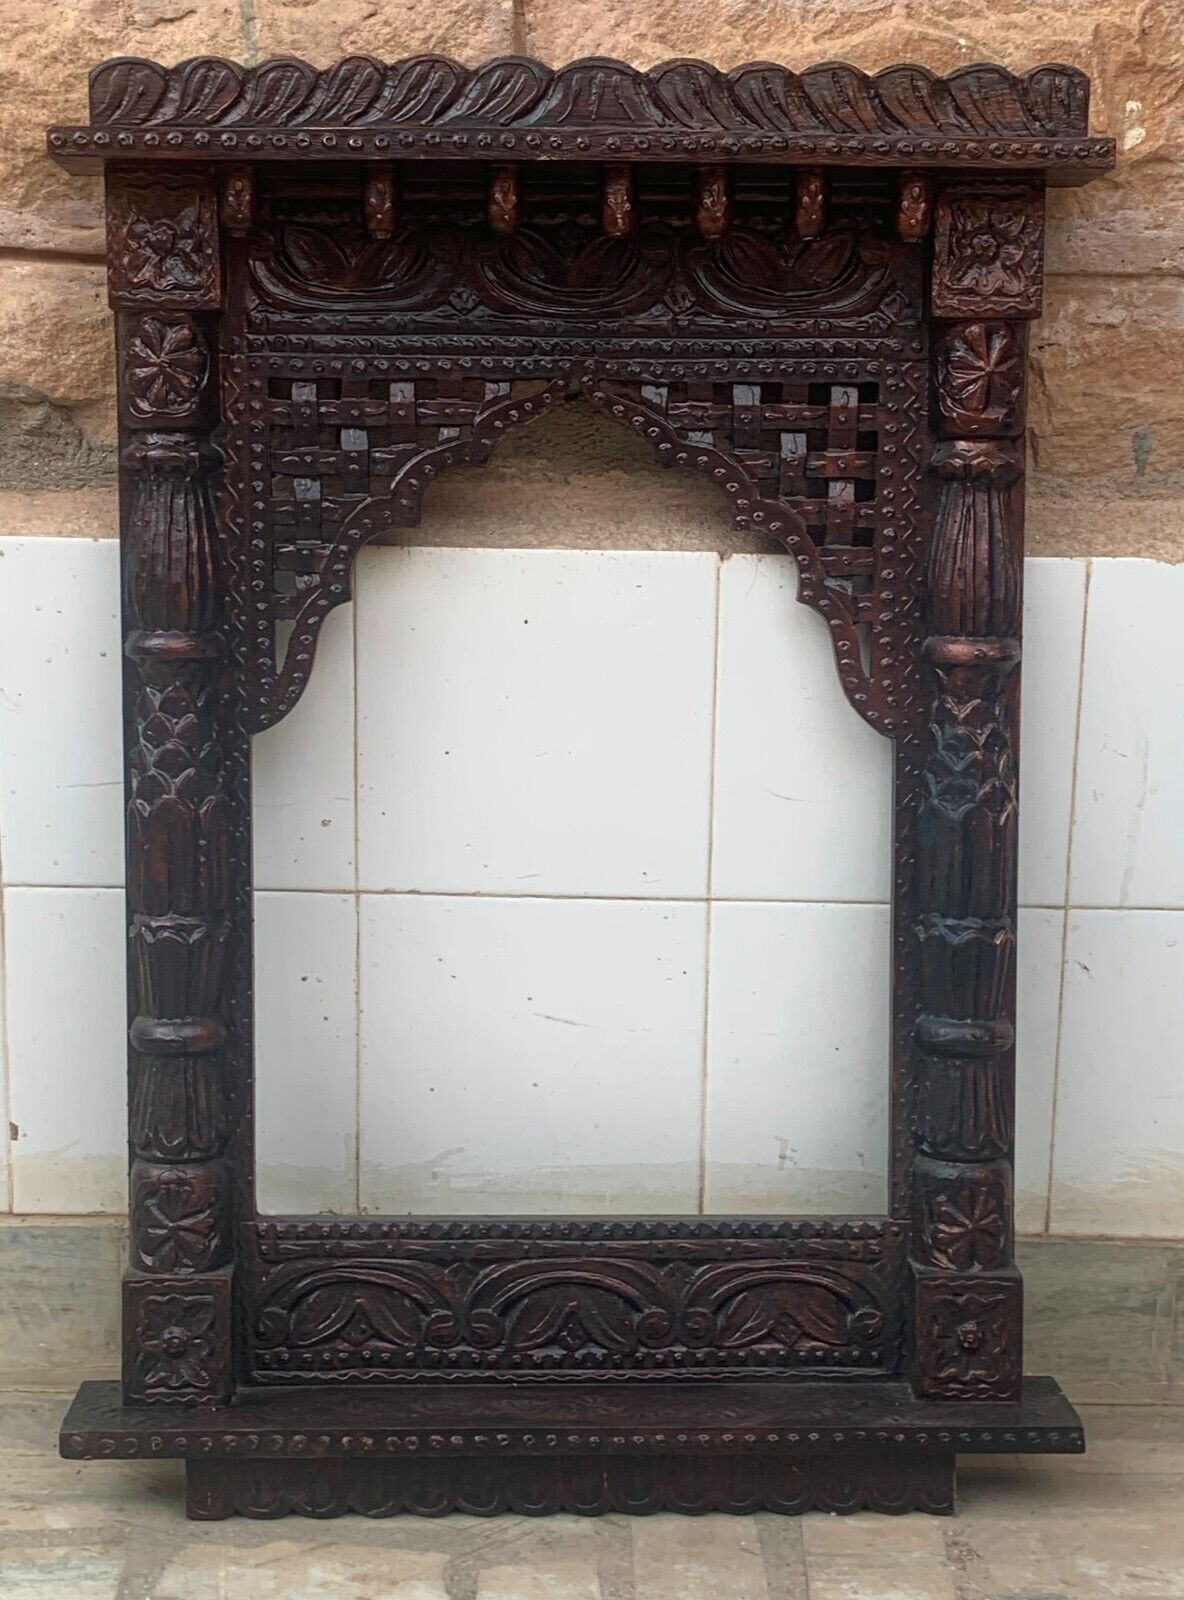 Wooden carved jharokha Indian traditional frame wall hanging mehrab home decor